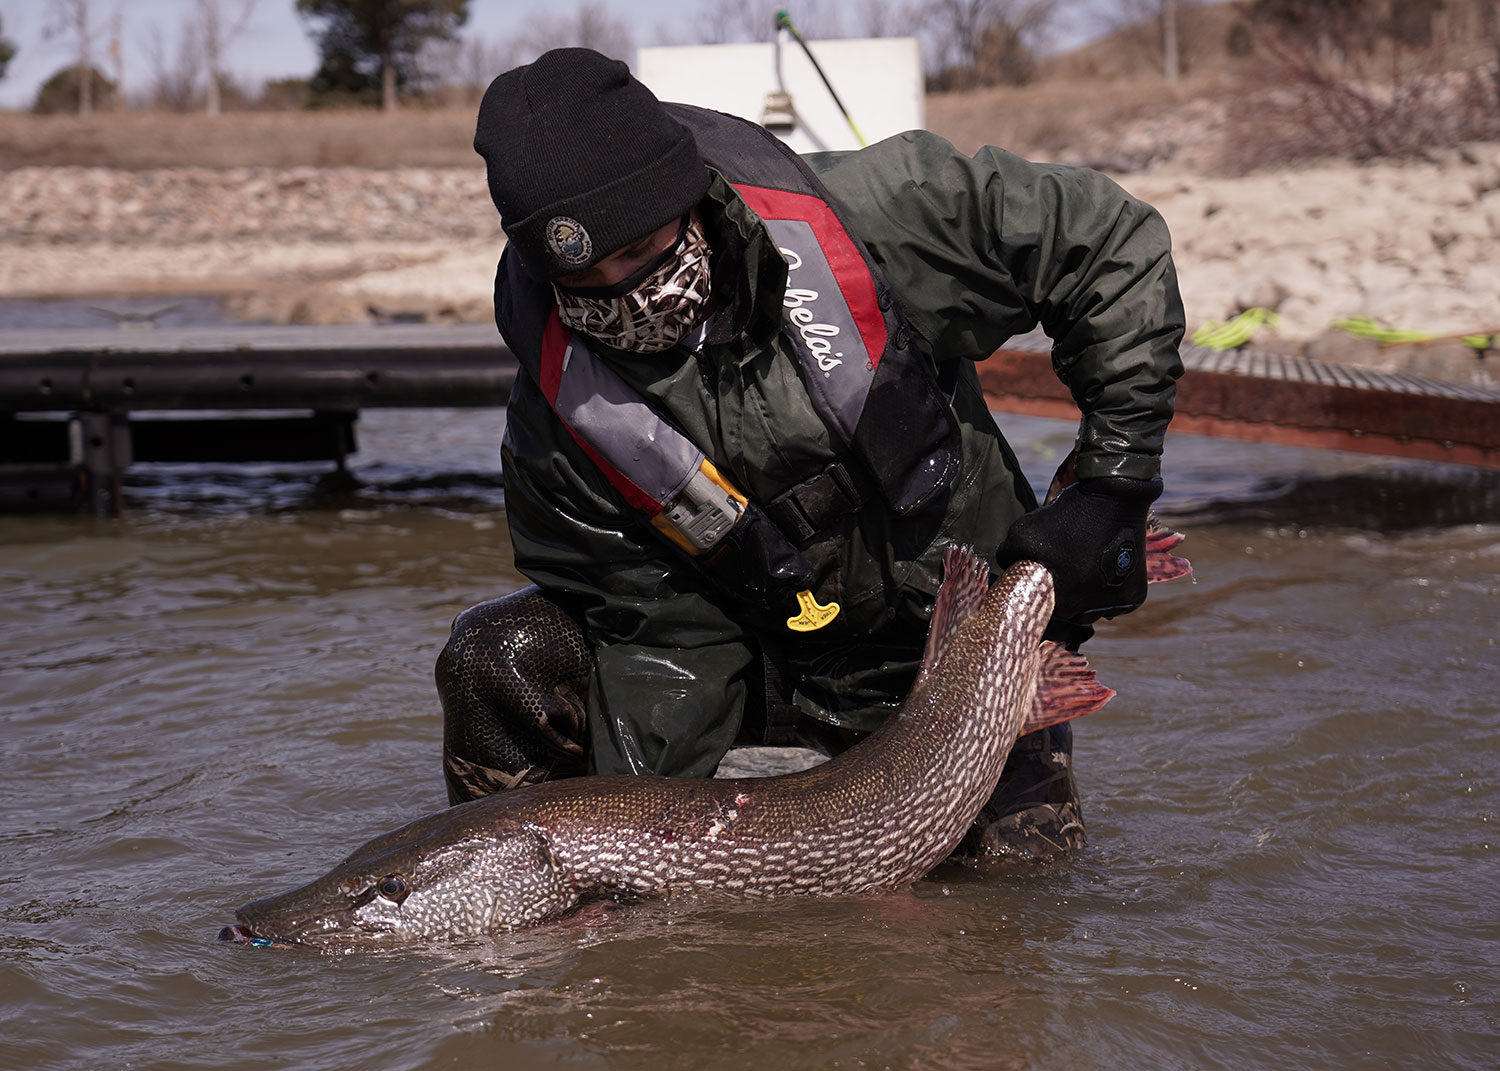 Biologist releasing tagged pike into water